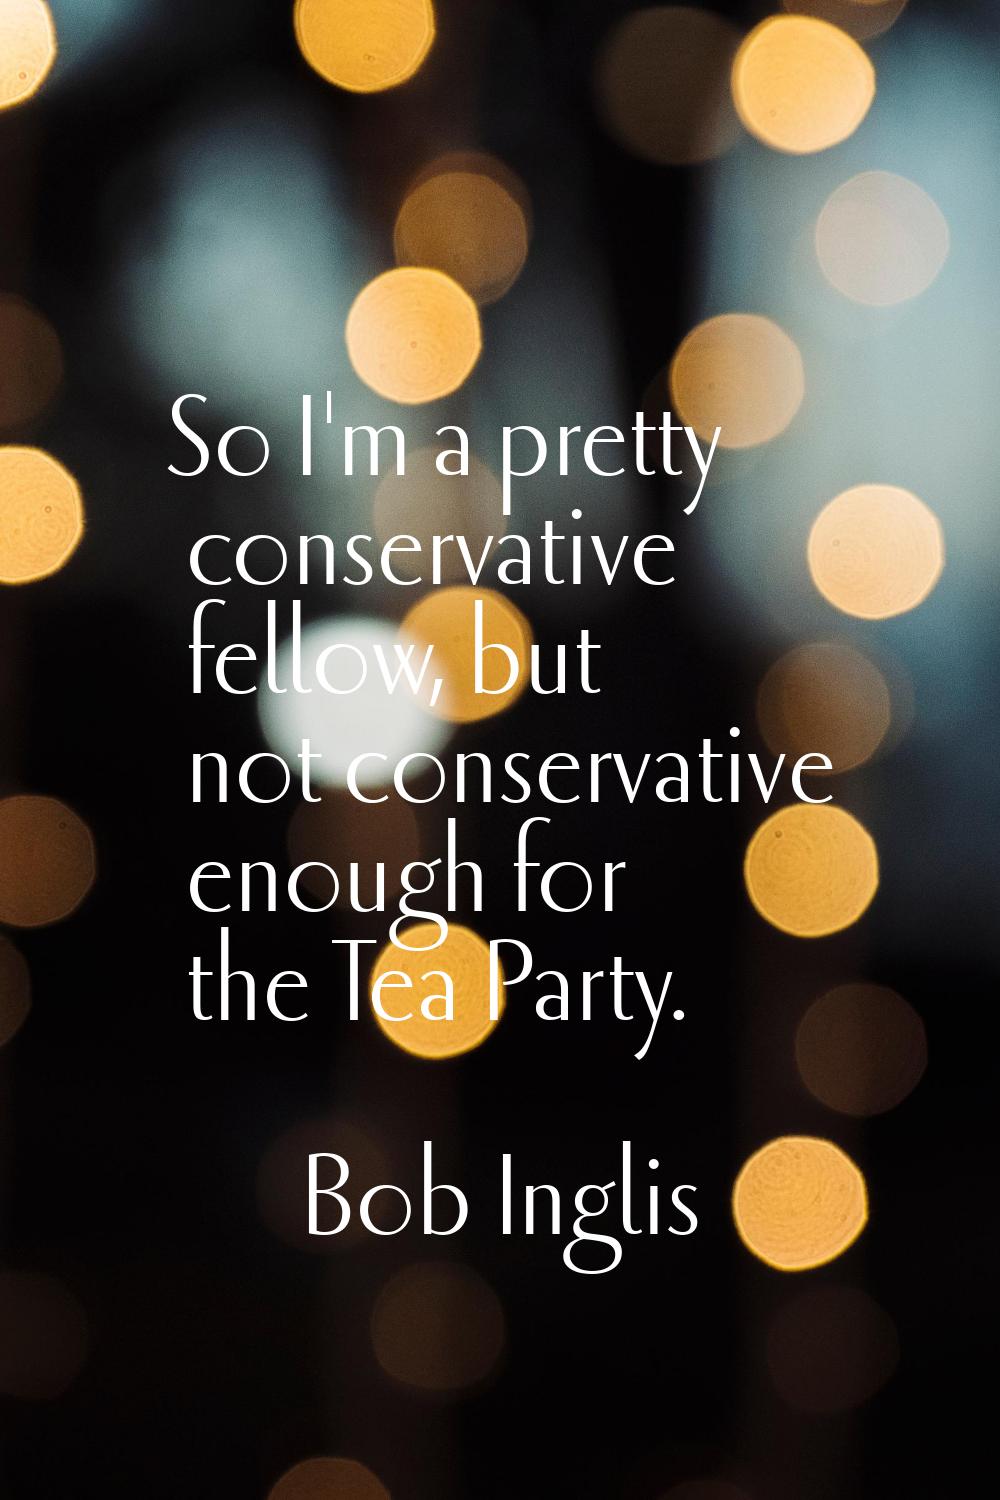 So I'm a pretty conservative fellow, but not conservative enough for the Tea Party.